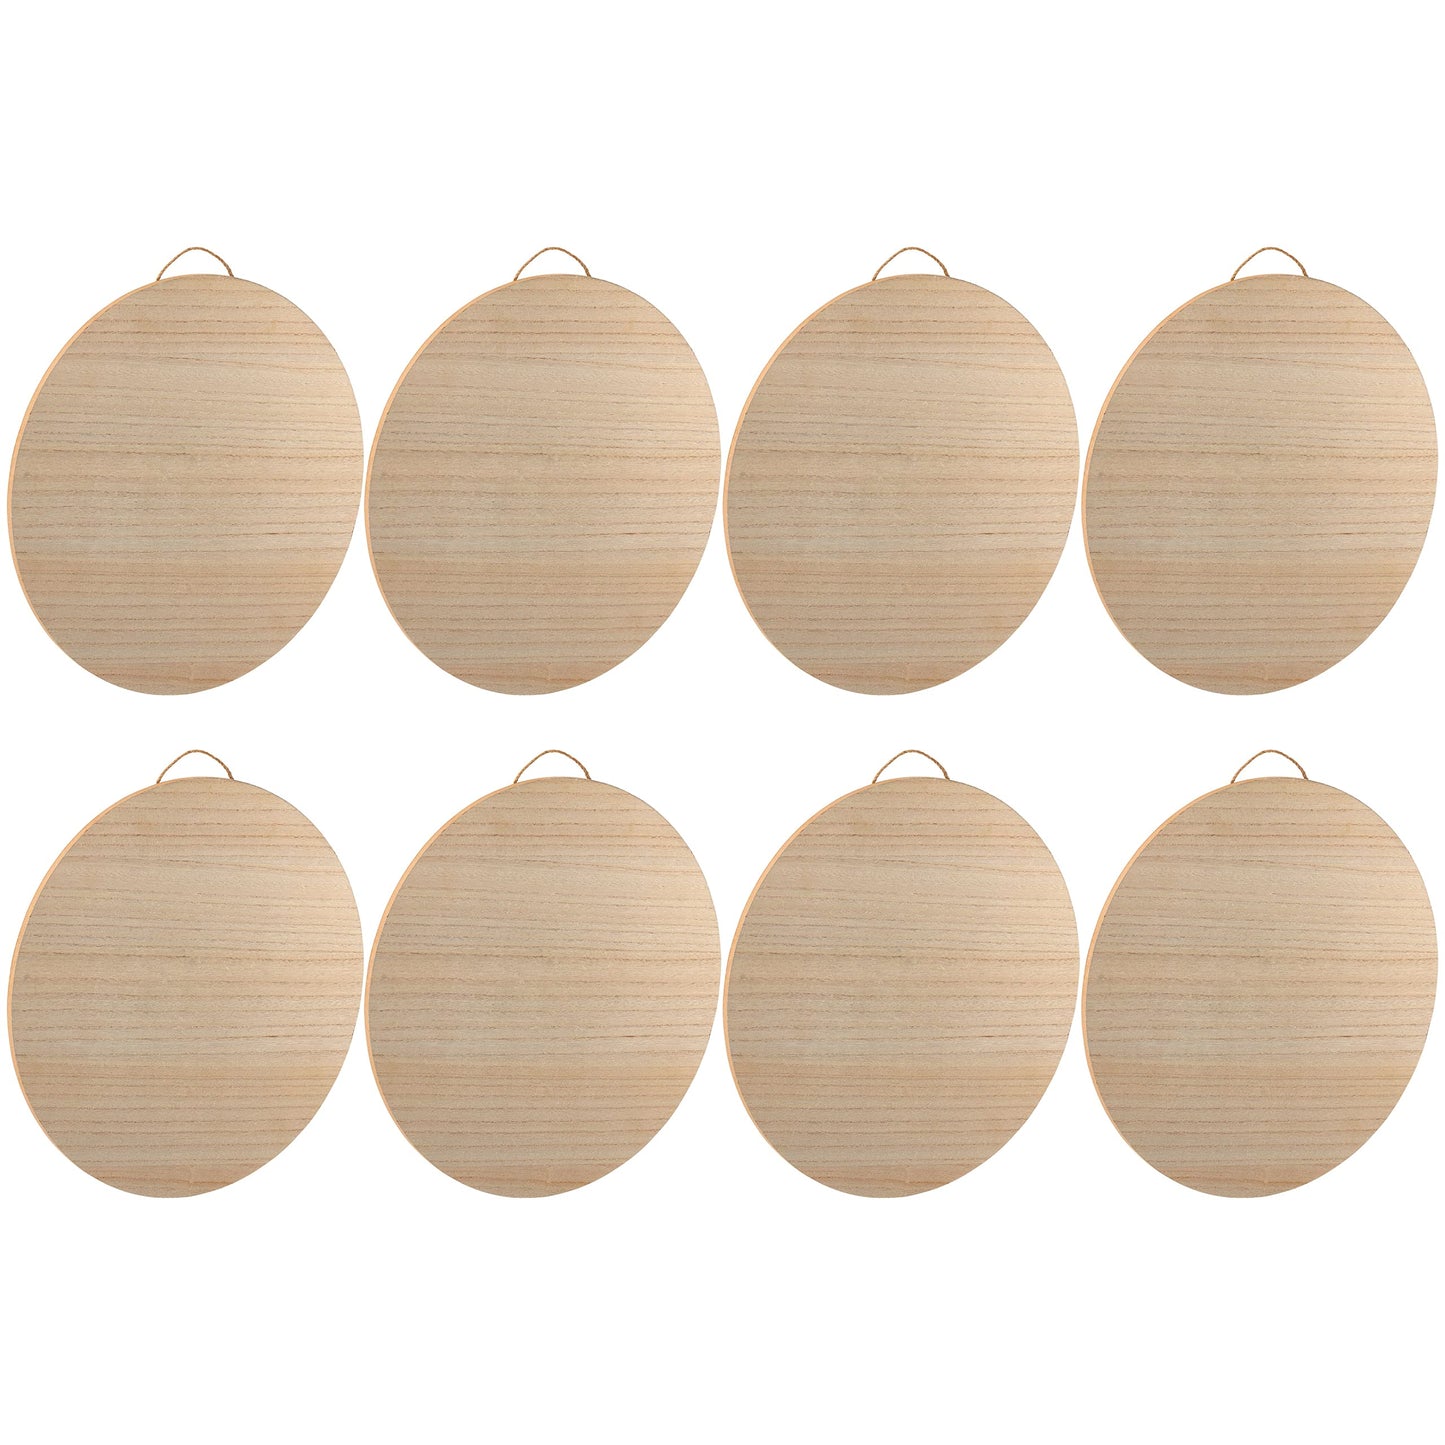 8 Pack: 9 x 6 Wood Plaque by Make Market®